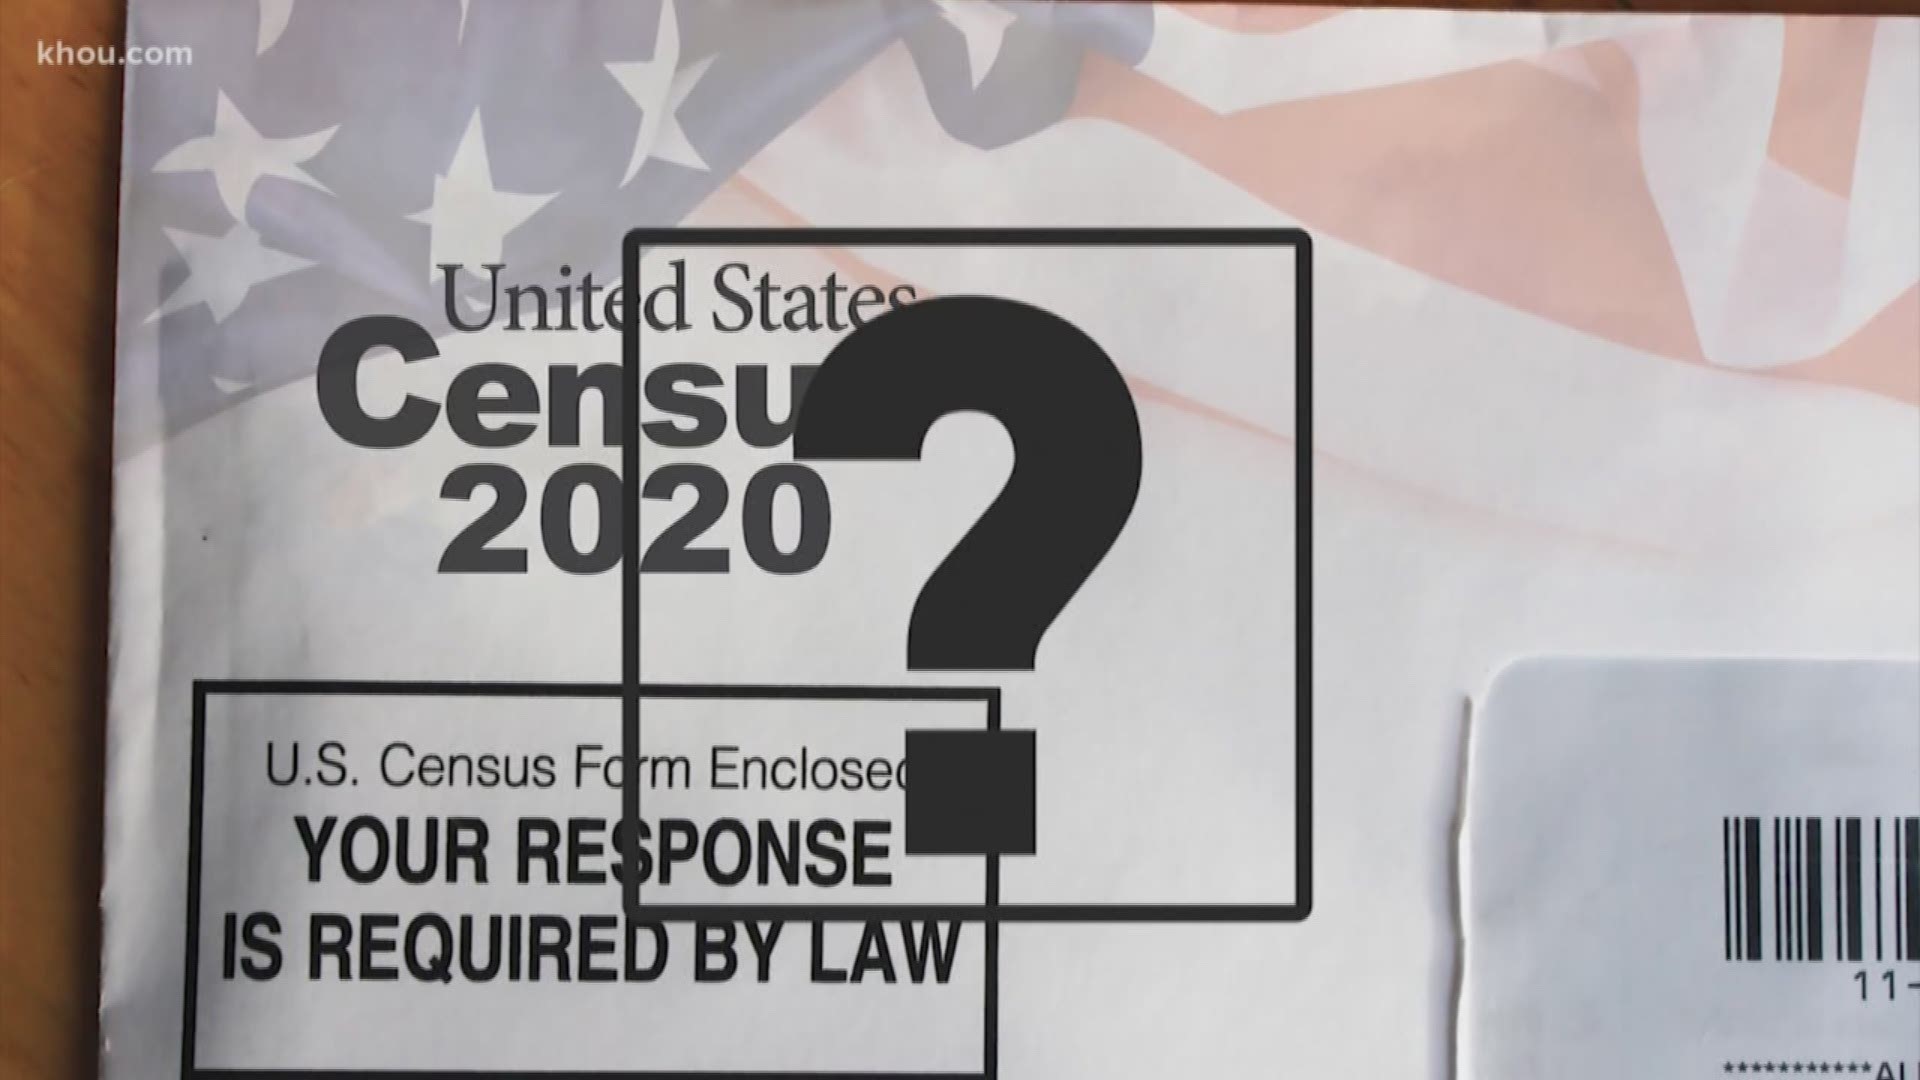 There are a lot of questions about the upcoming 2020 Census. Like, what happens if you don't respond to the survey? The Verify team got answers.